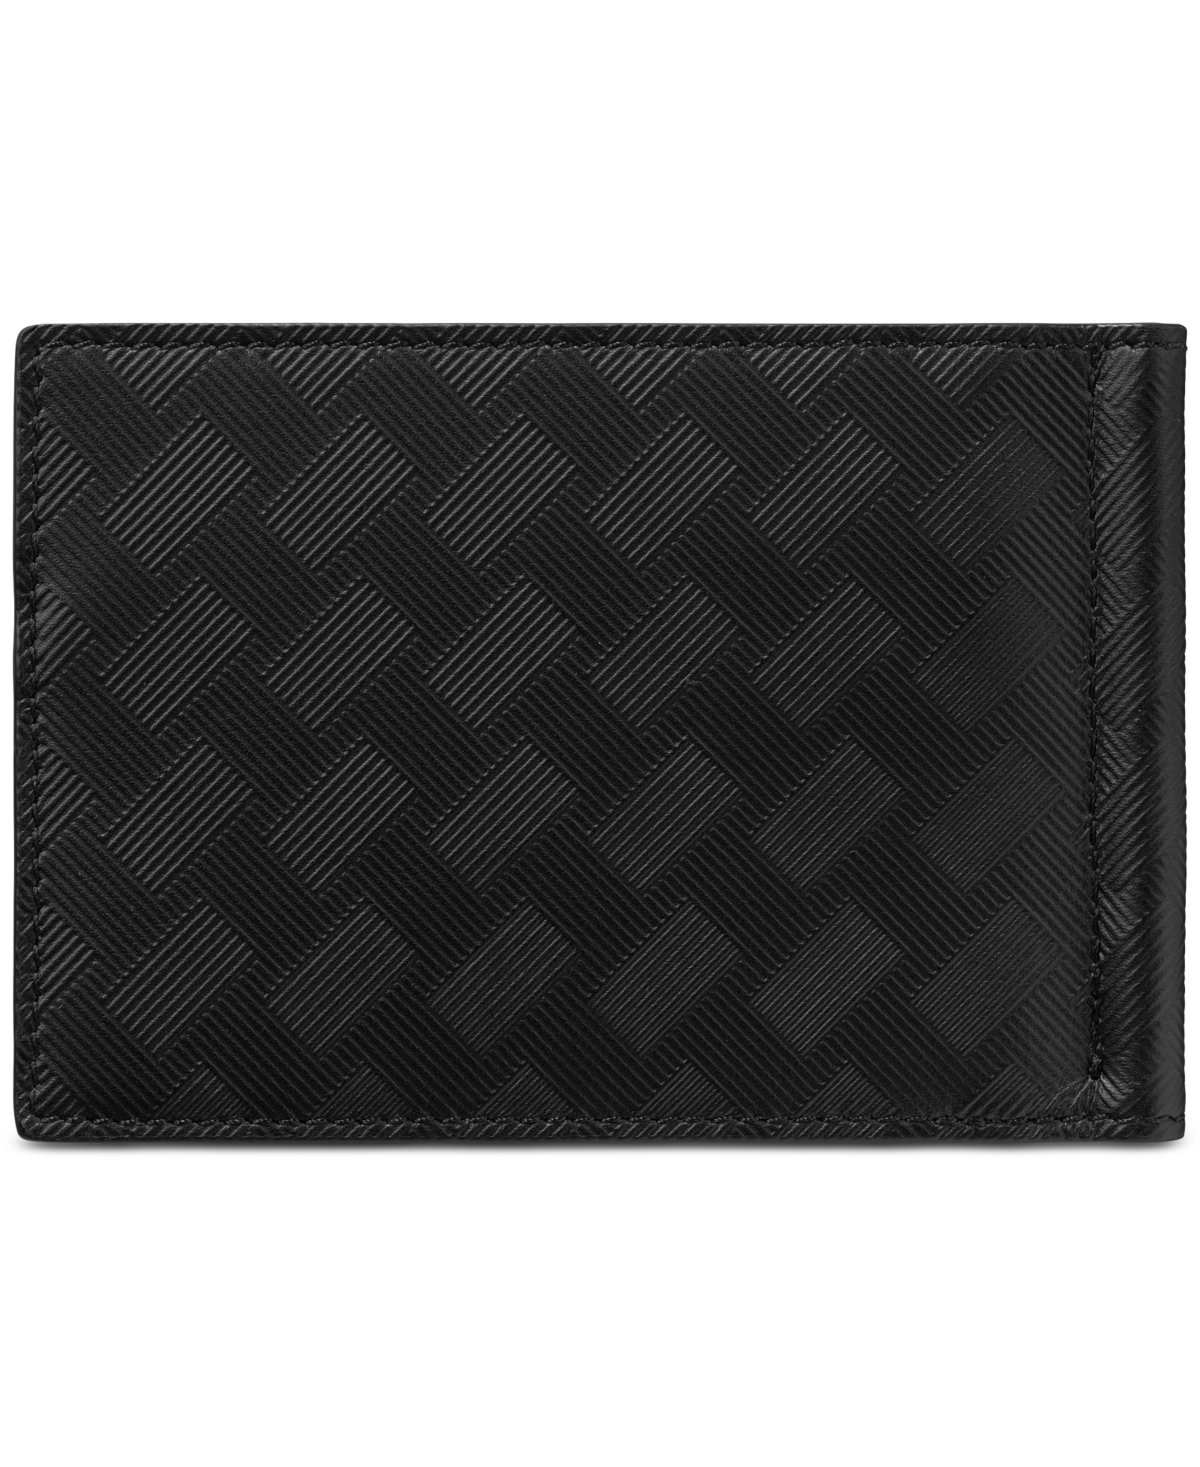 Montblanc Extreme 3.0 Leather Wallet With Money Clip In Black